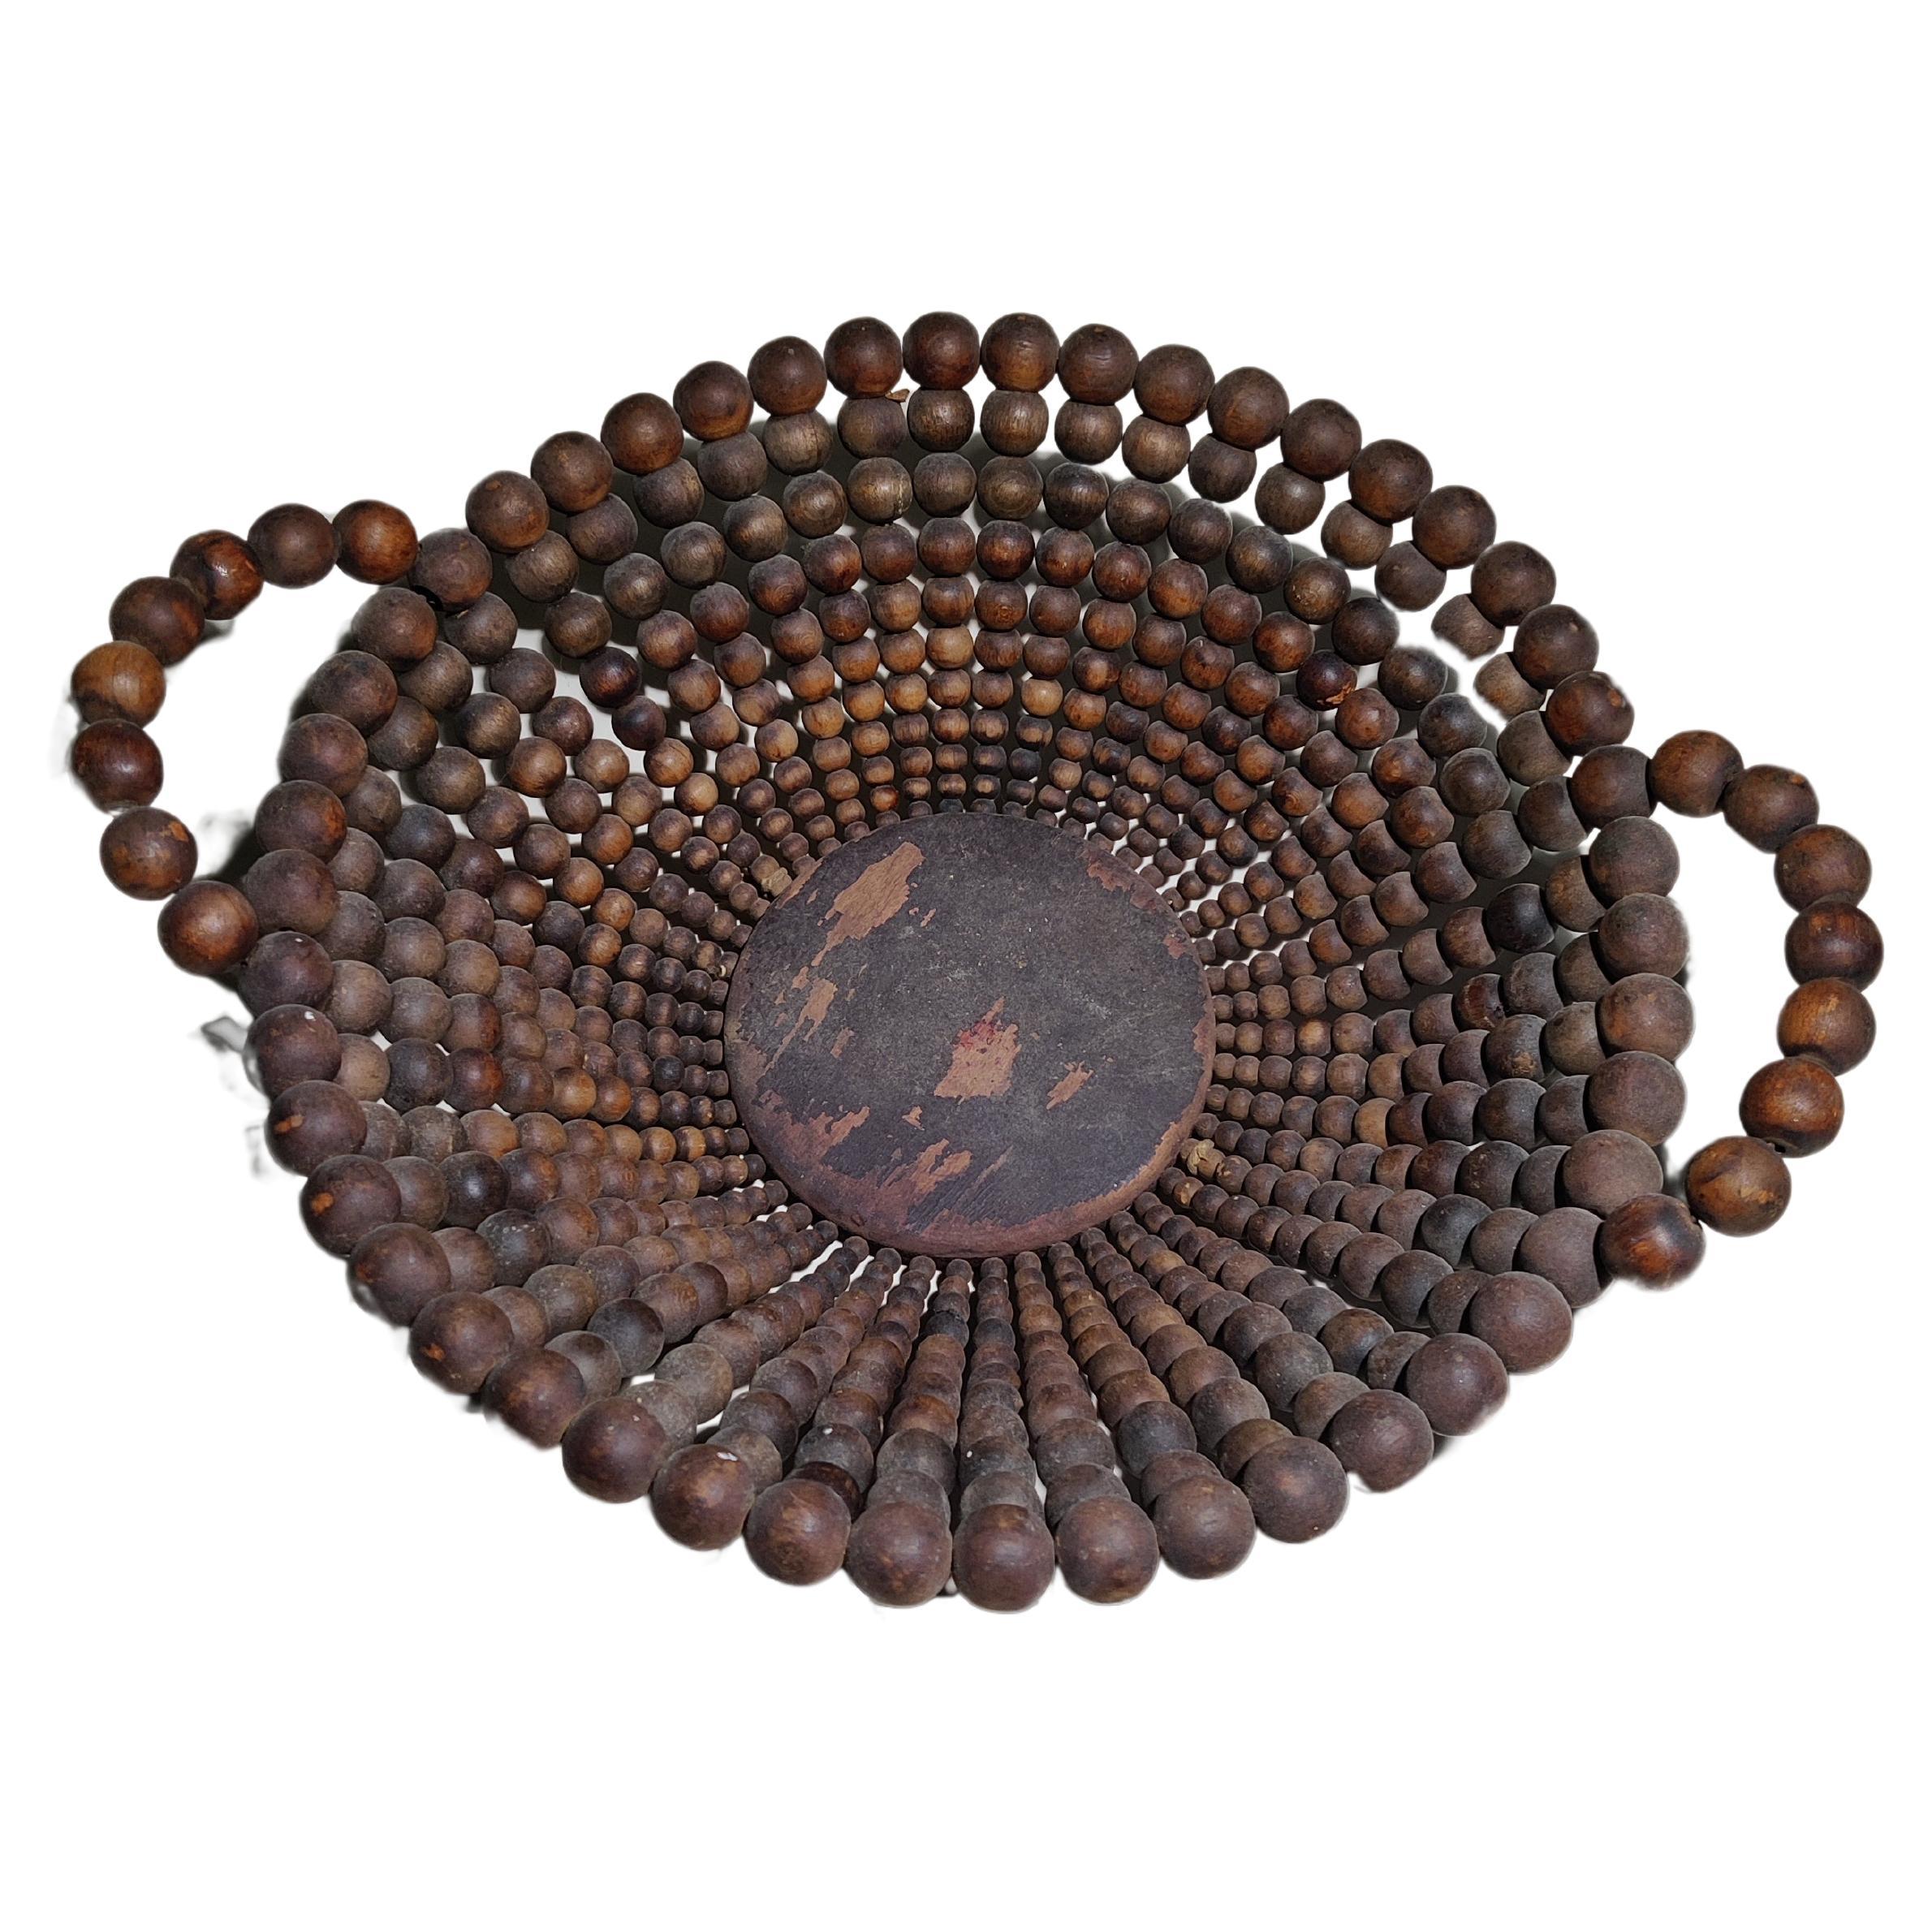 Czechoslovakian stamped Rustic Wooden Bead Bowl  For Sale